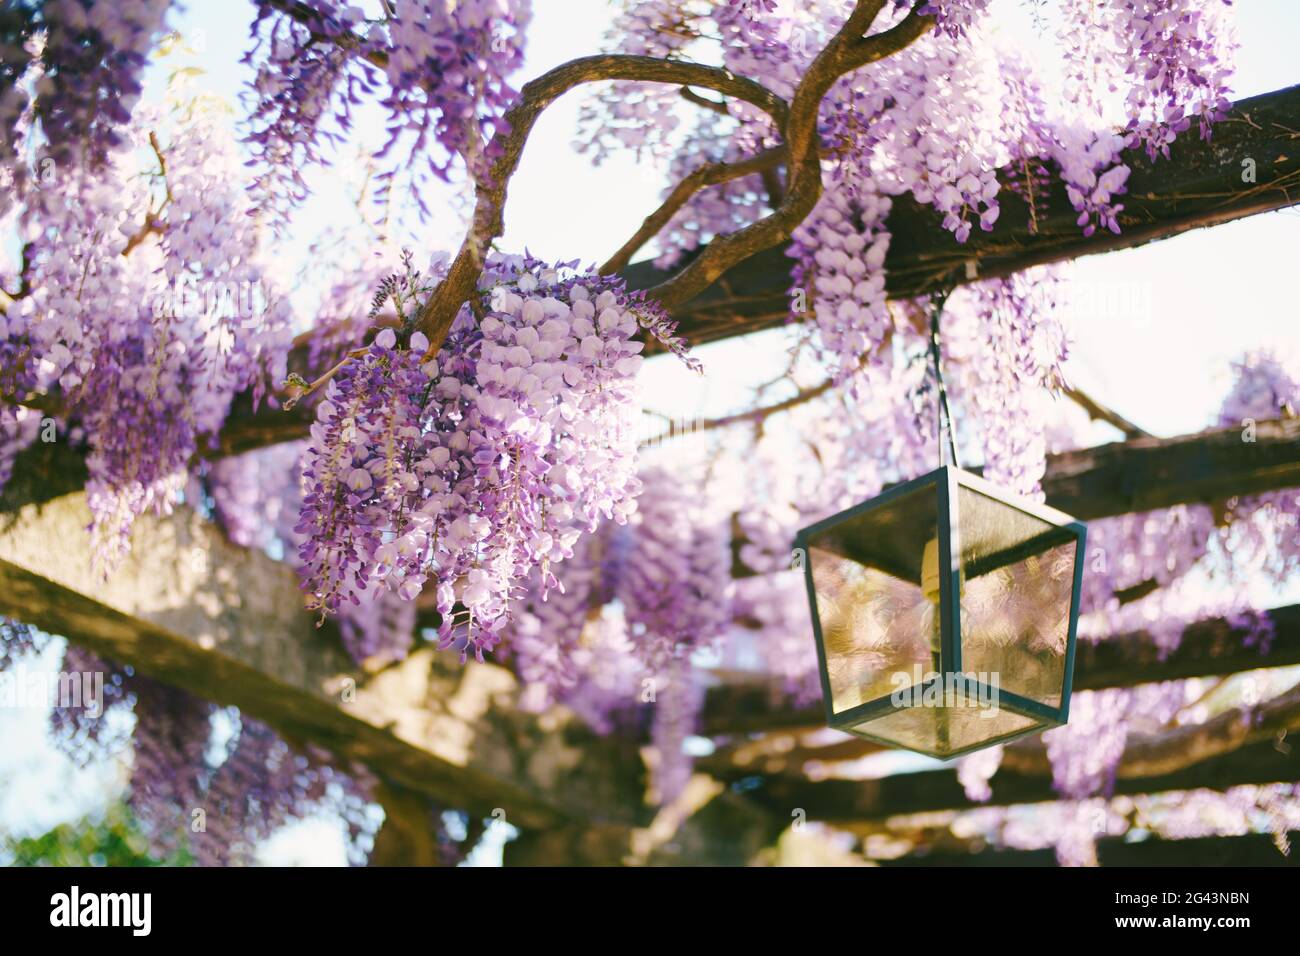 Close-up of blooming wisteria on wooden beams by a hanging street lamp. Stock Photo